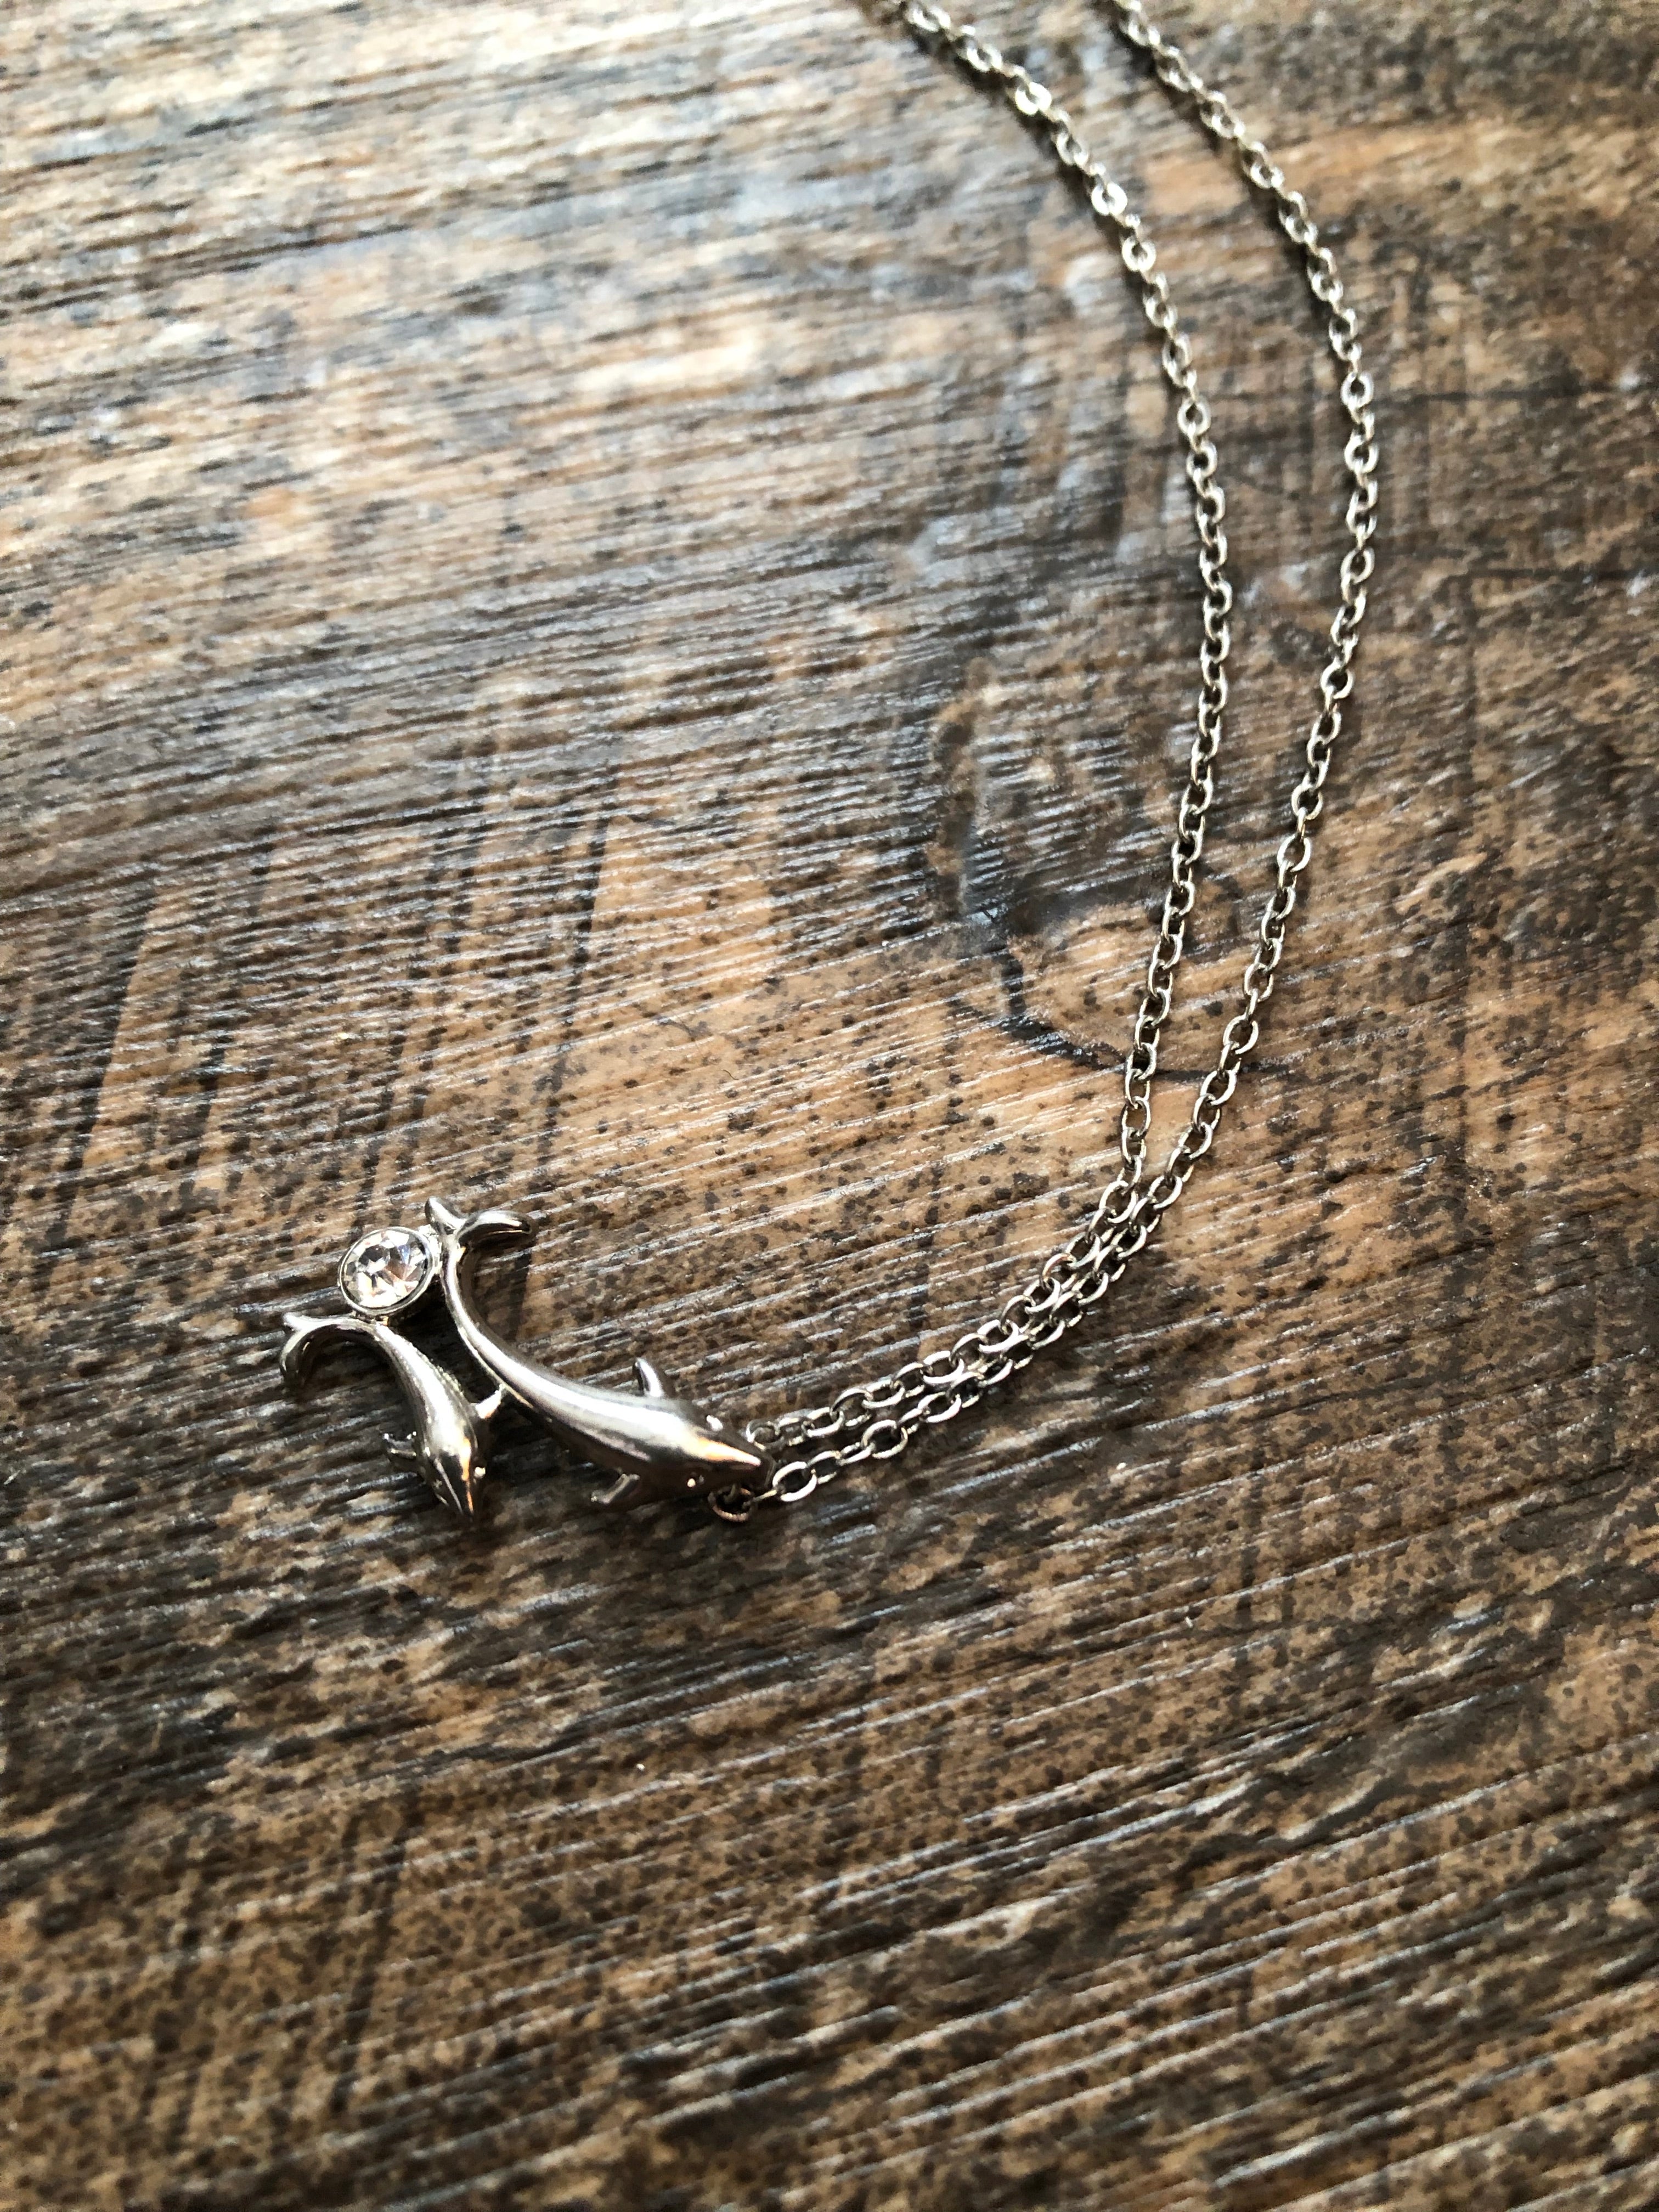 Necklace - Dolphins